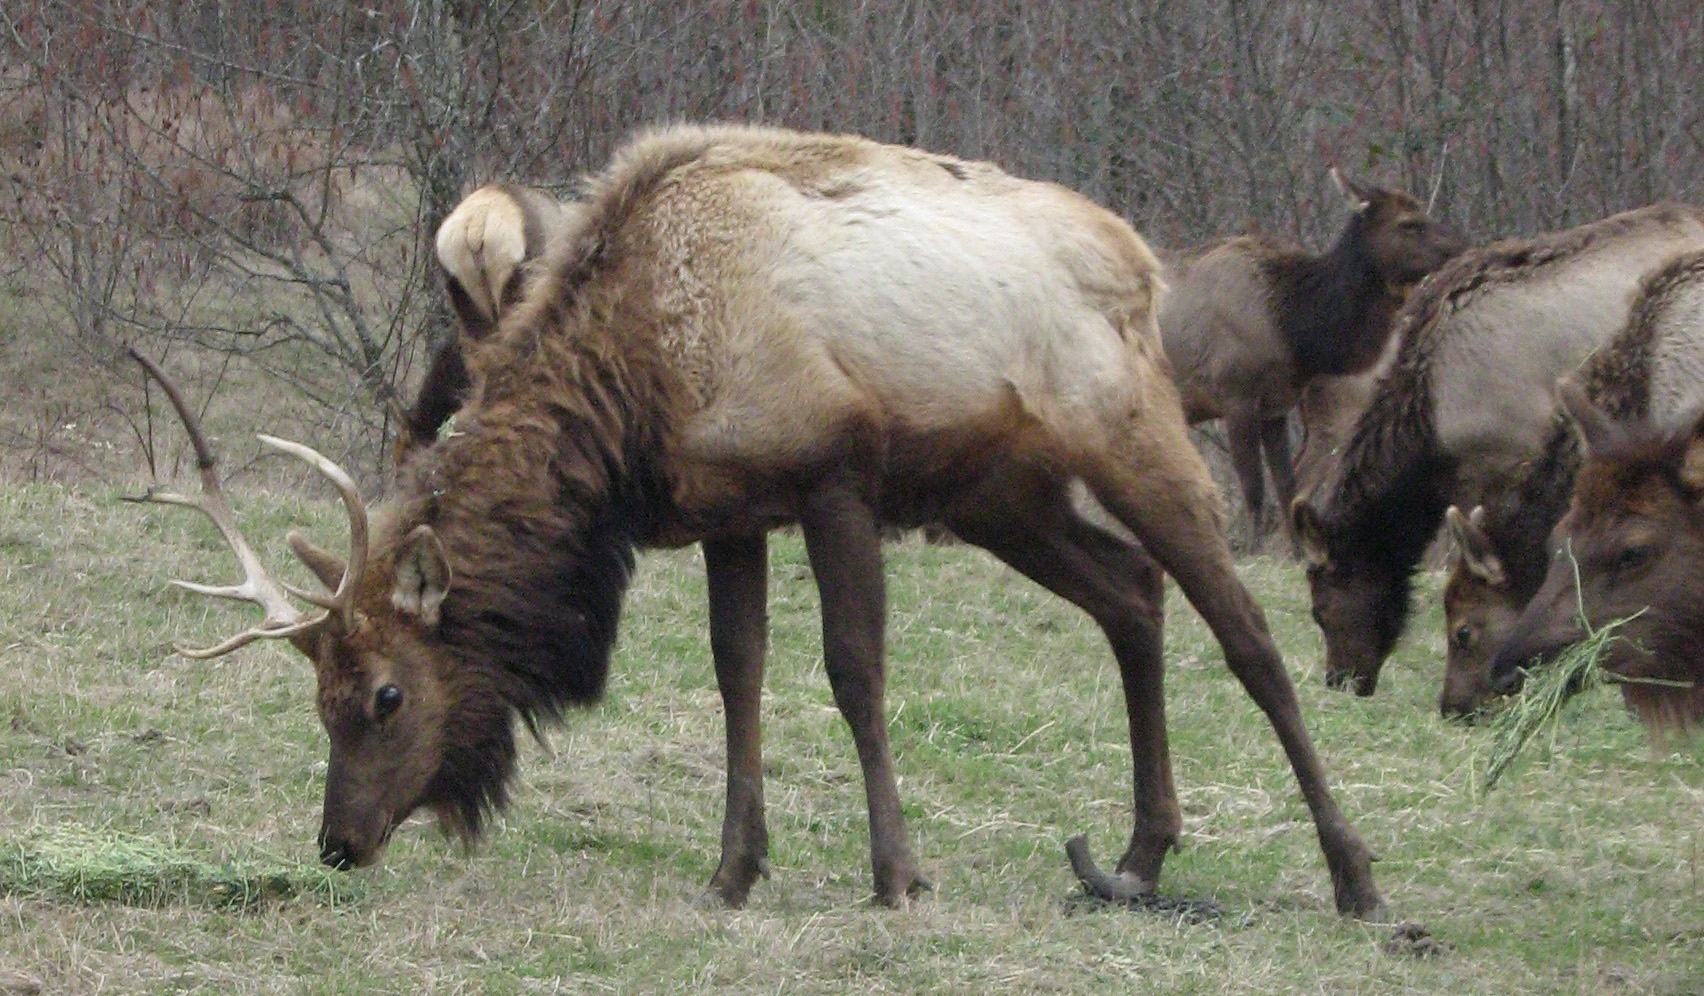 Hoof disease in Southwest Washington elk started in the Cowlitz River valley but has moved into other areas.